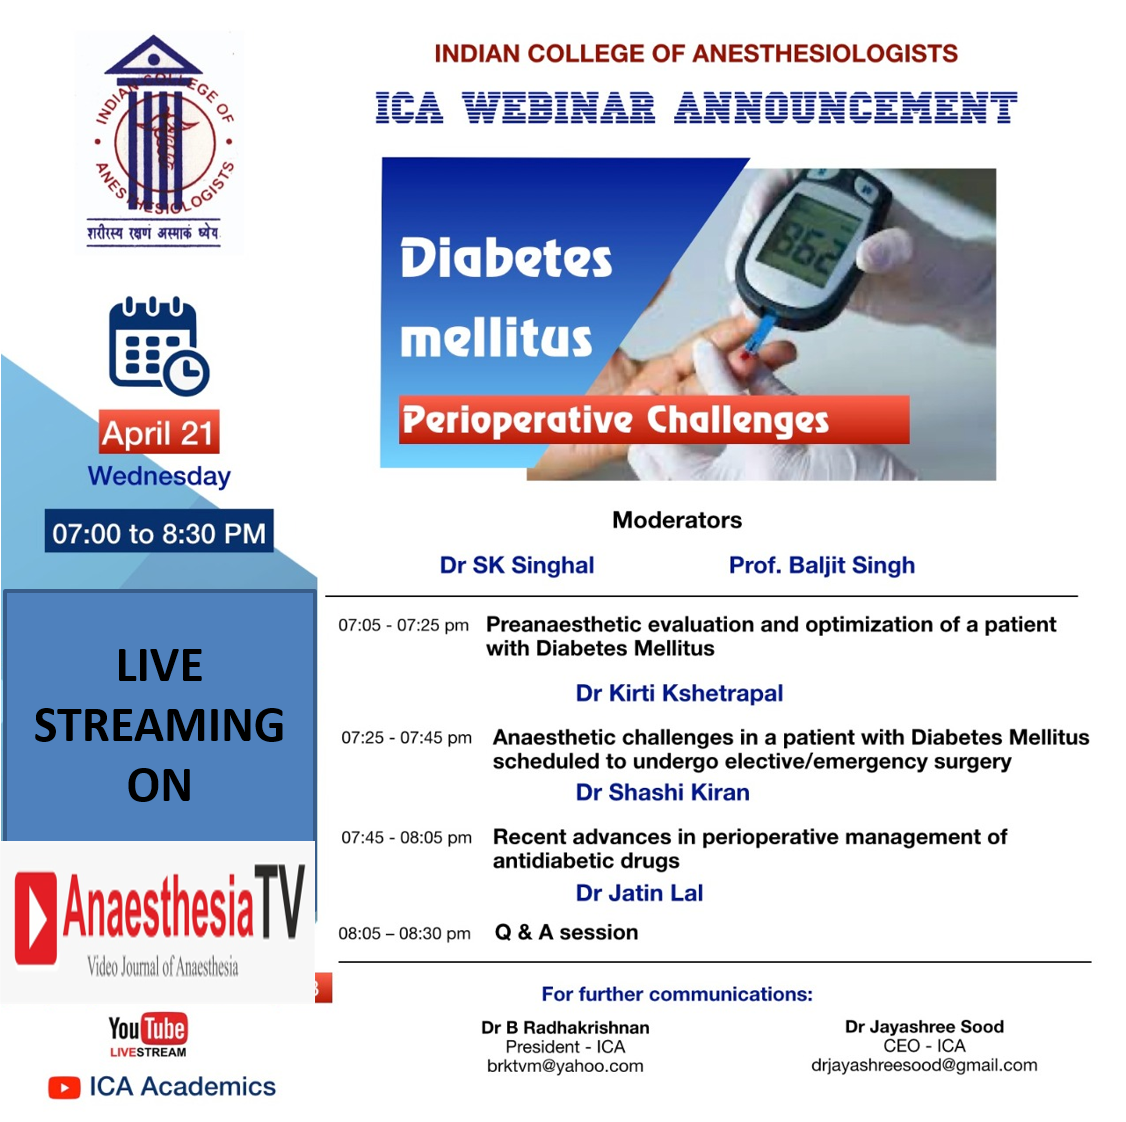 INDIAN COLLEGE OF ANESTHESIOLOGISTS ( ICA ) Presents Webinar on “DIABETES MELLITUS PERIOPERATIVE CHALLENGES”